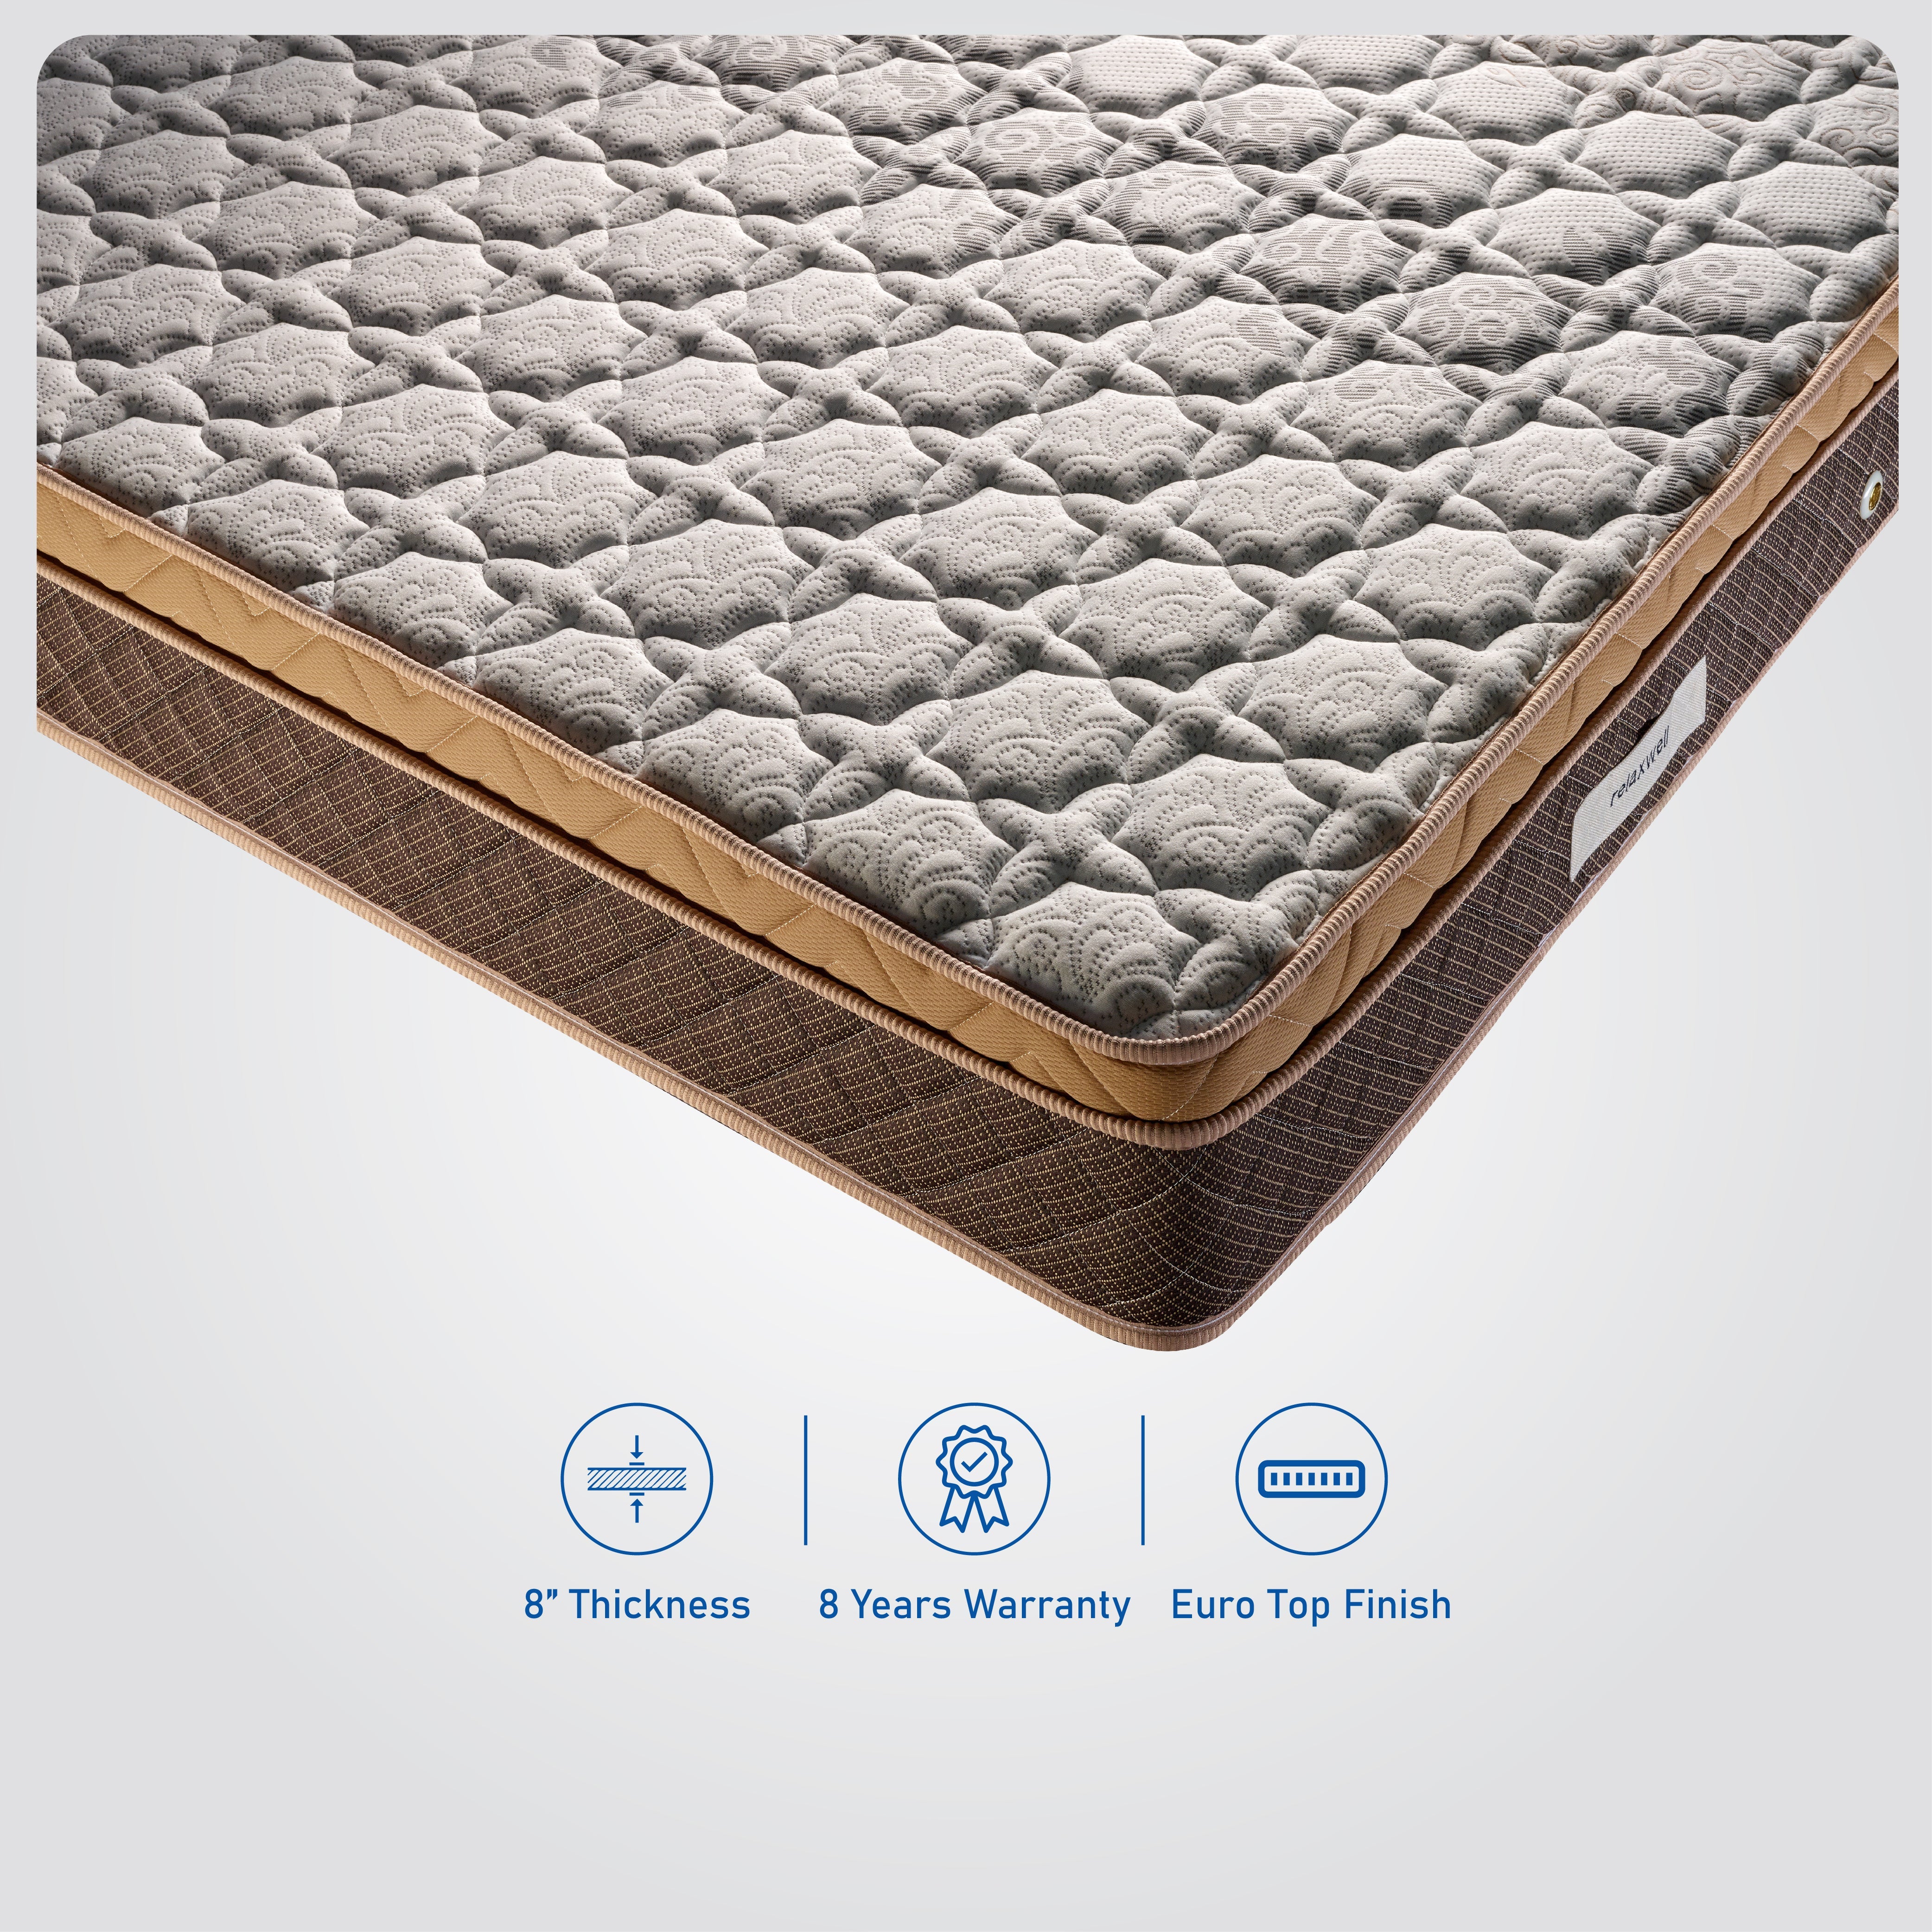 Buy Comfort Pocketed Spring Custom Mattress with Euro Top Finish In India